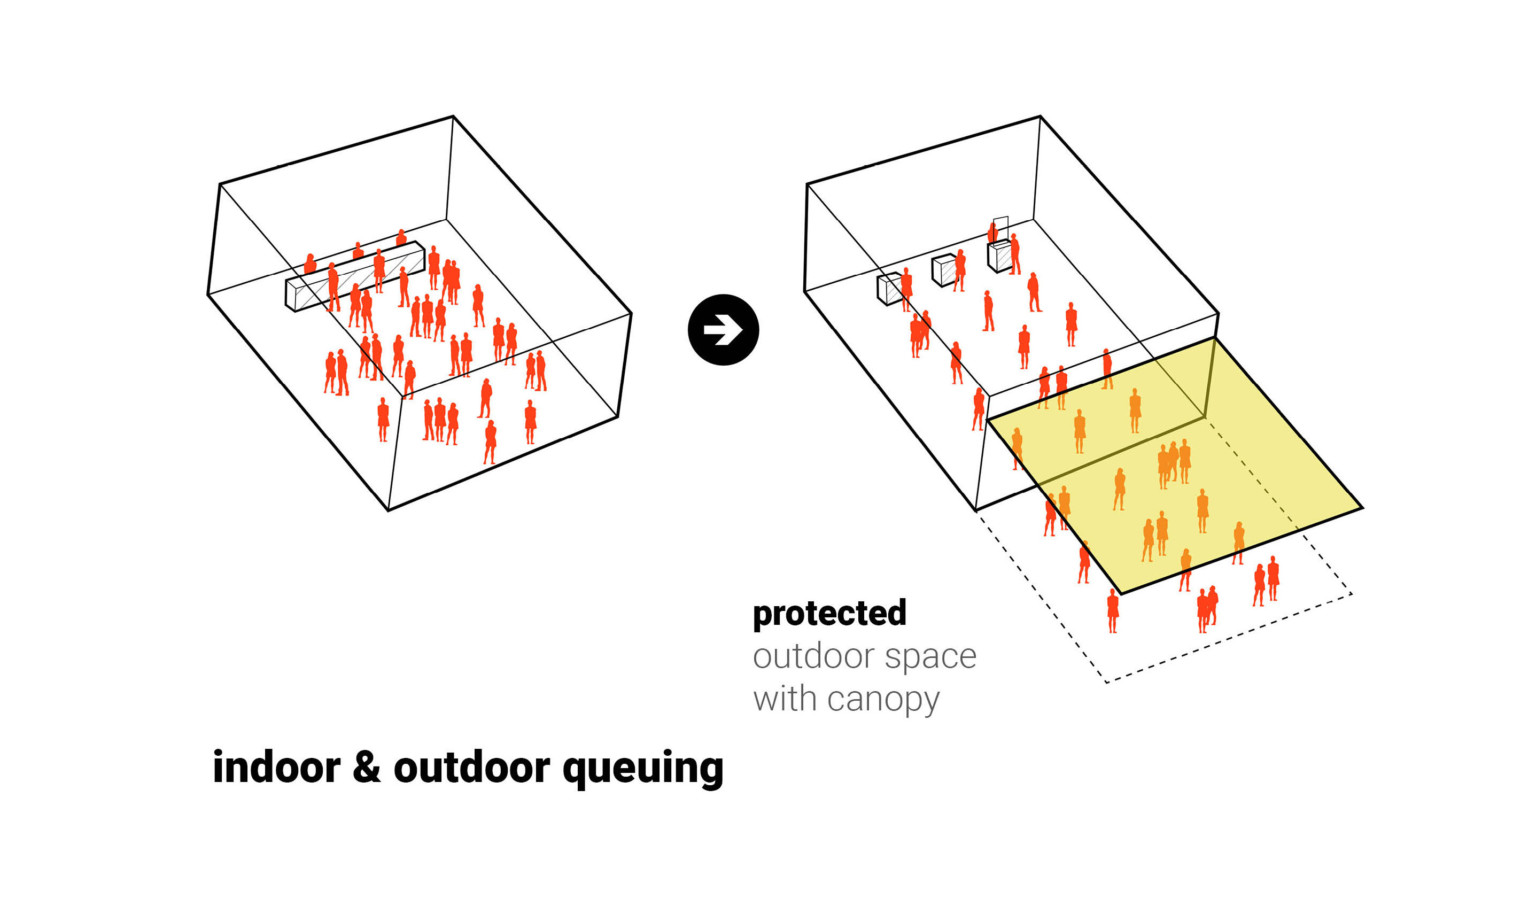 Diagram labeled indoor & outdoor queuing shows how to disperse crowd by using protected outdoor space with canopy (in yellow)